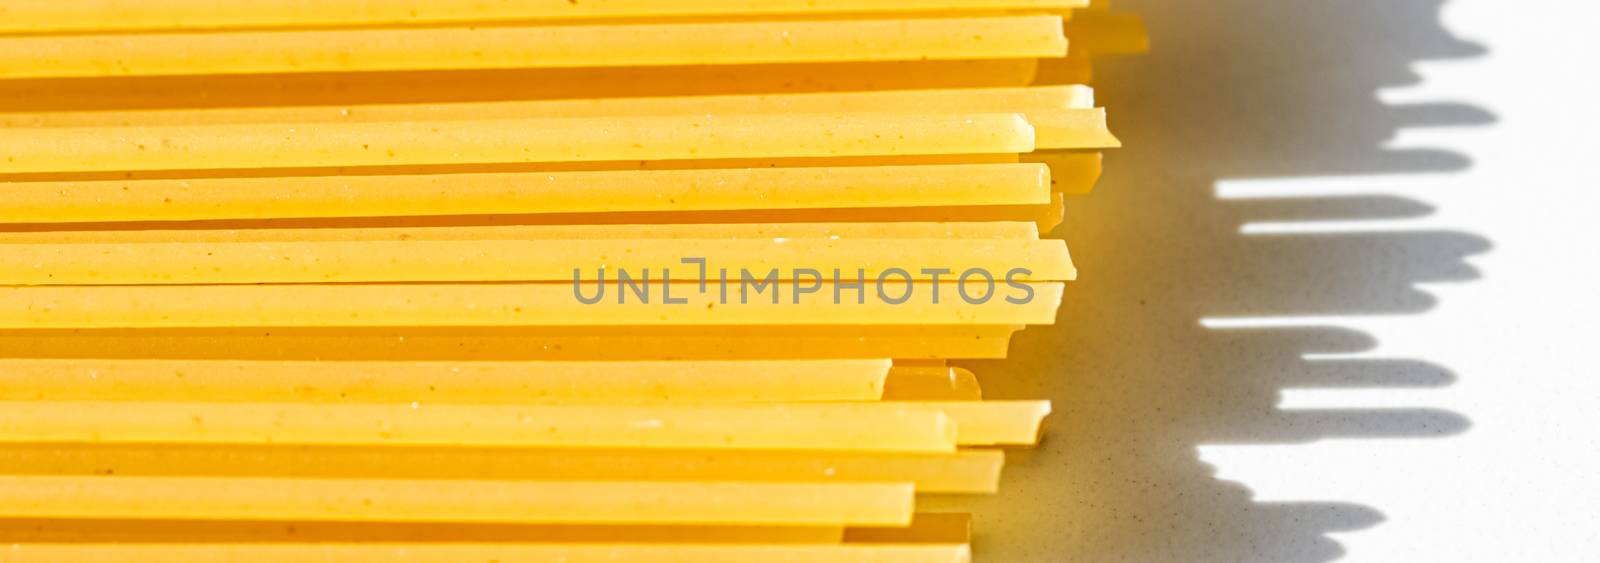 Uncooked whole grain spaghetti closeup, italian pasta as organic food ingredient, macro product and cook book recipe by Anneleven